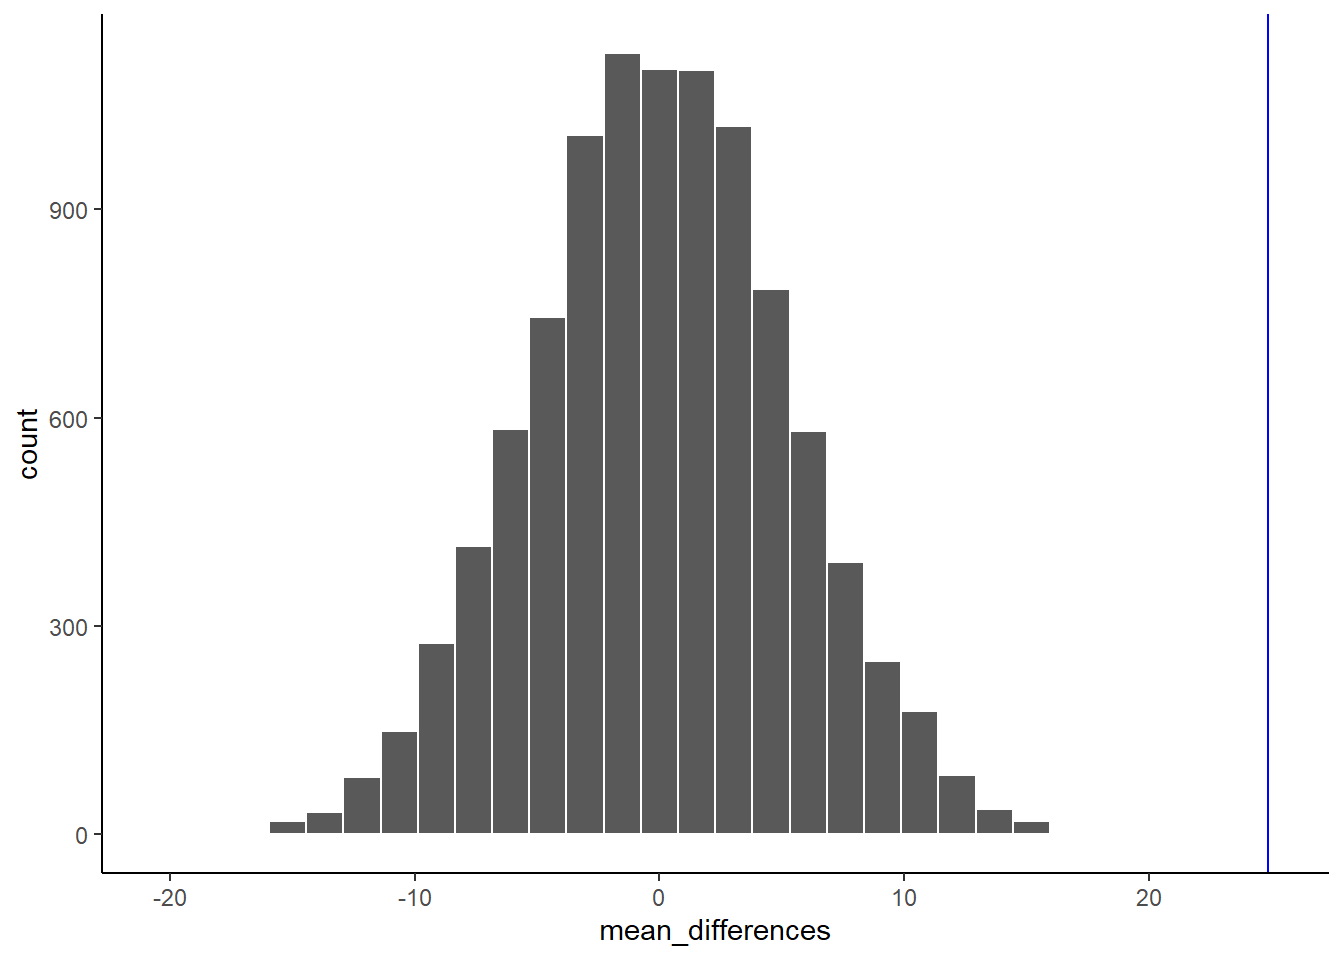 A histogram of simulated mean differences for a randomization test